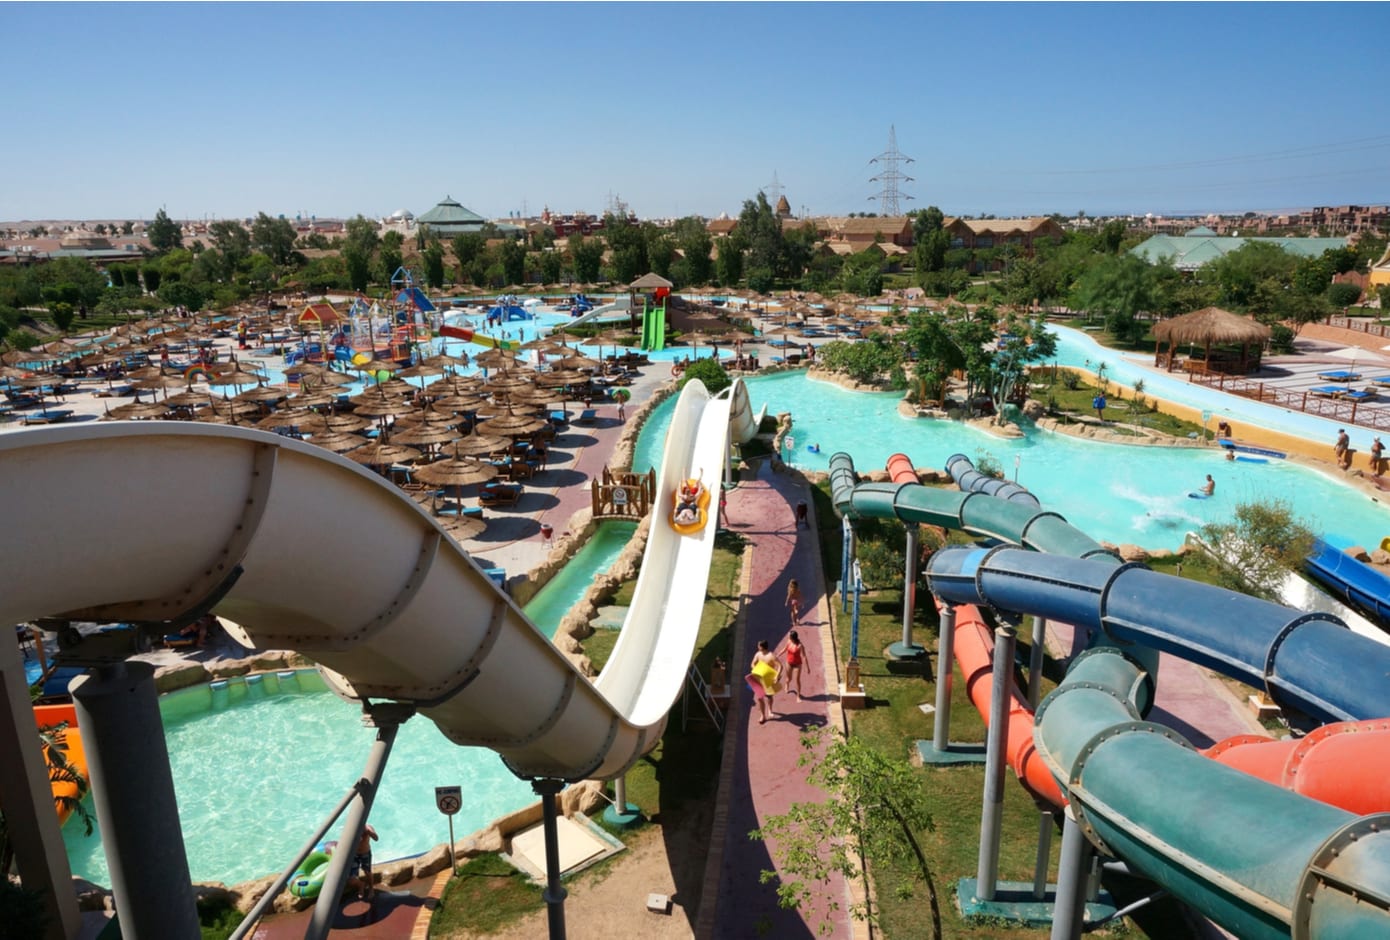 Water slides within the Jungle Aquapark Resort in Hurghada, Egypt